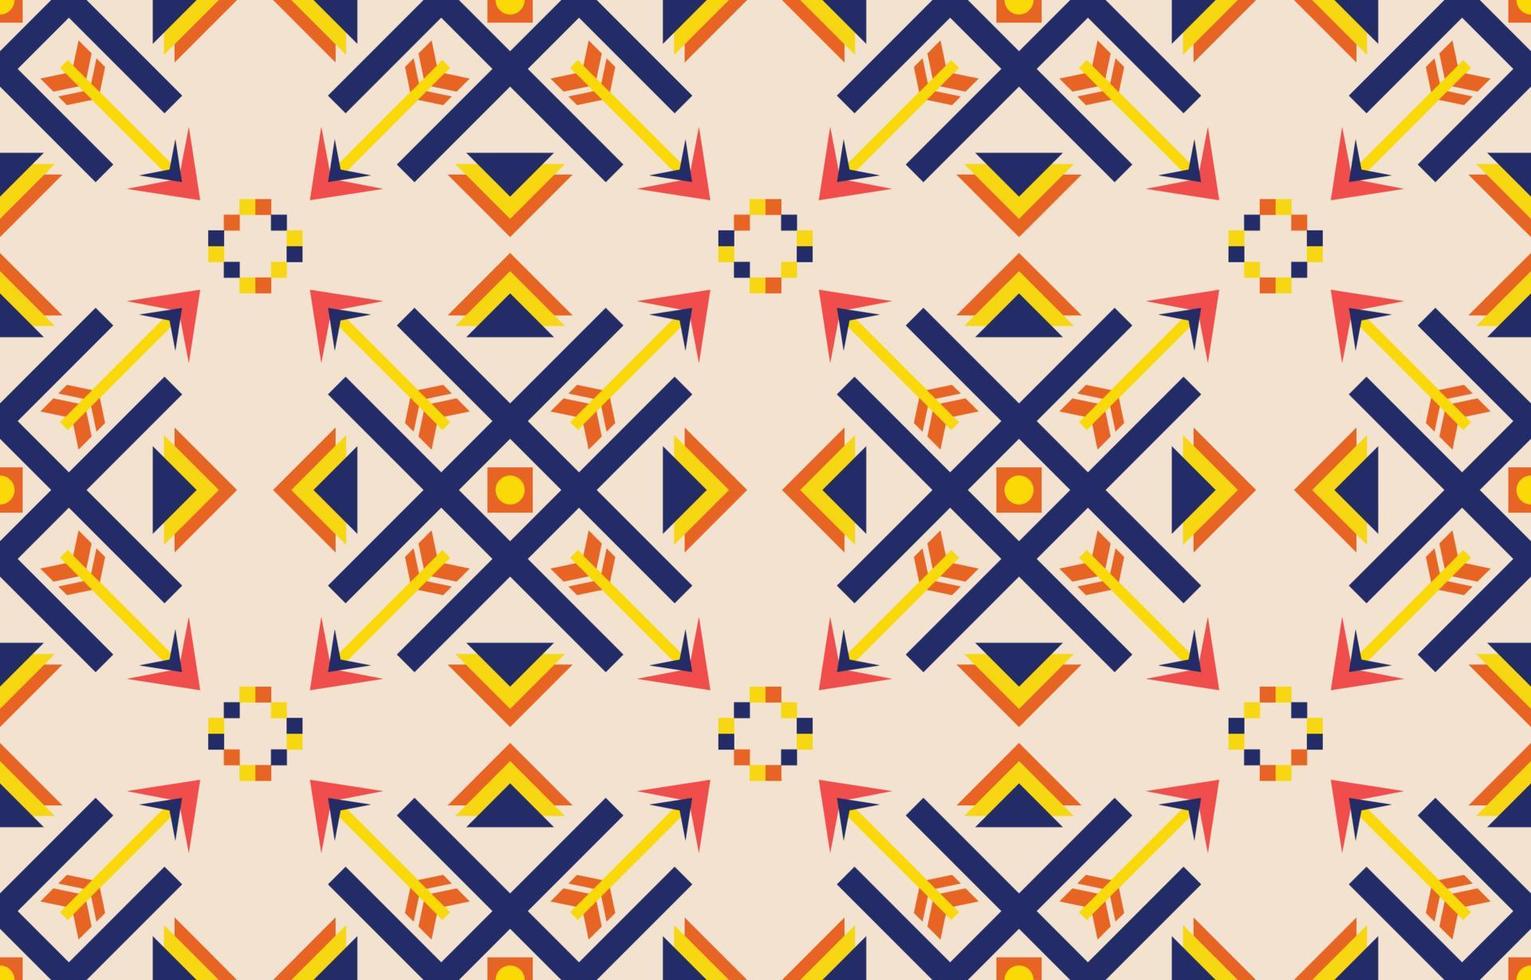 Navajo native american fabric seamless pattern,geometric tribal ethnic traditional background, design elements, design for carpet,wallpaper,clothing,rug,interior,embroidery vector illustration.